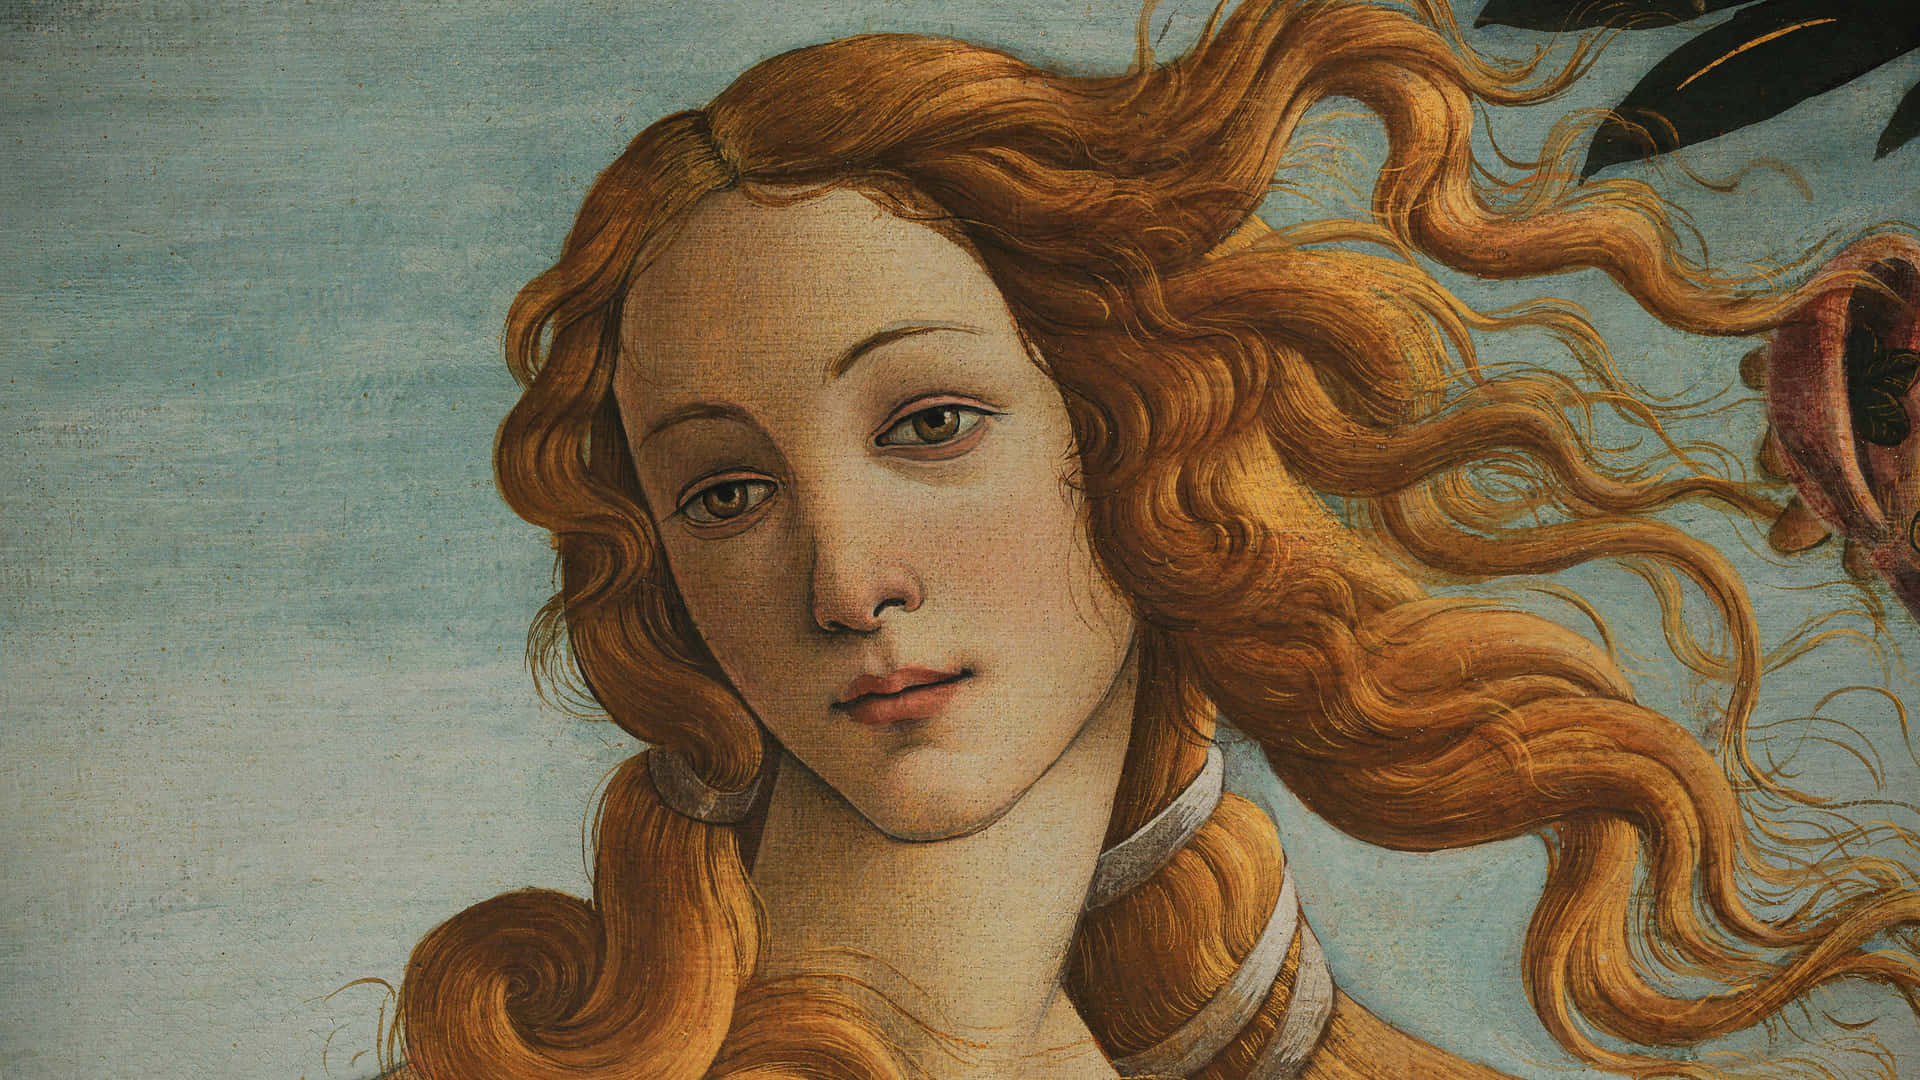 A Painting Of A Woman With Long Hair